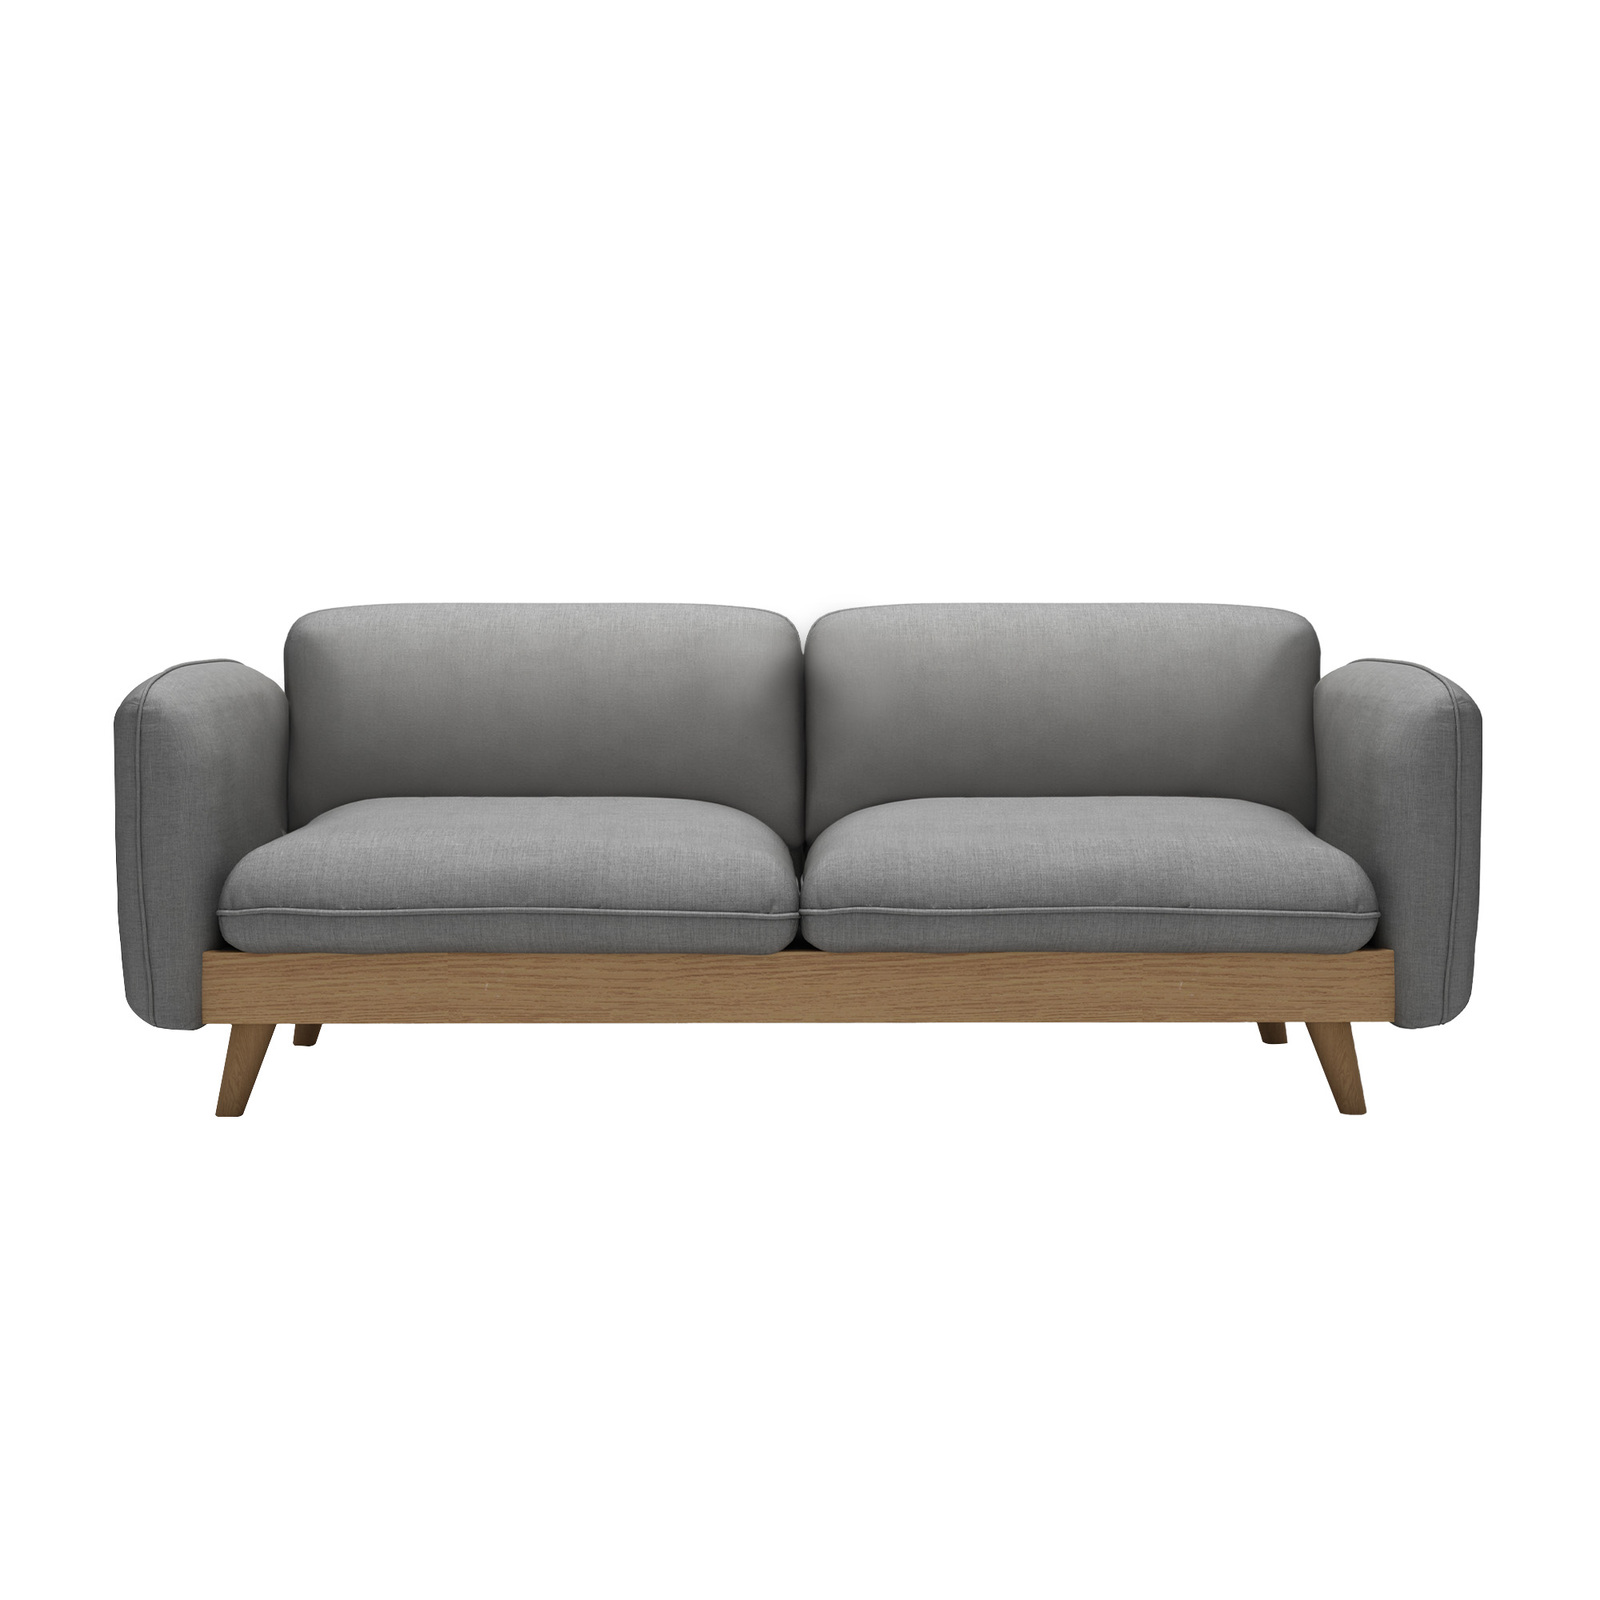 Sofa Large Double 2-3 Seater Couch - Grey Fabric 2 Sizes